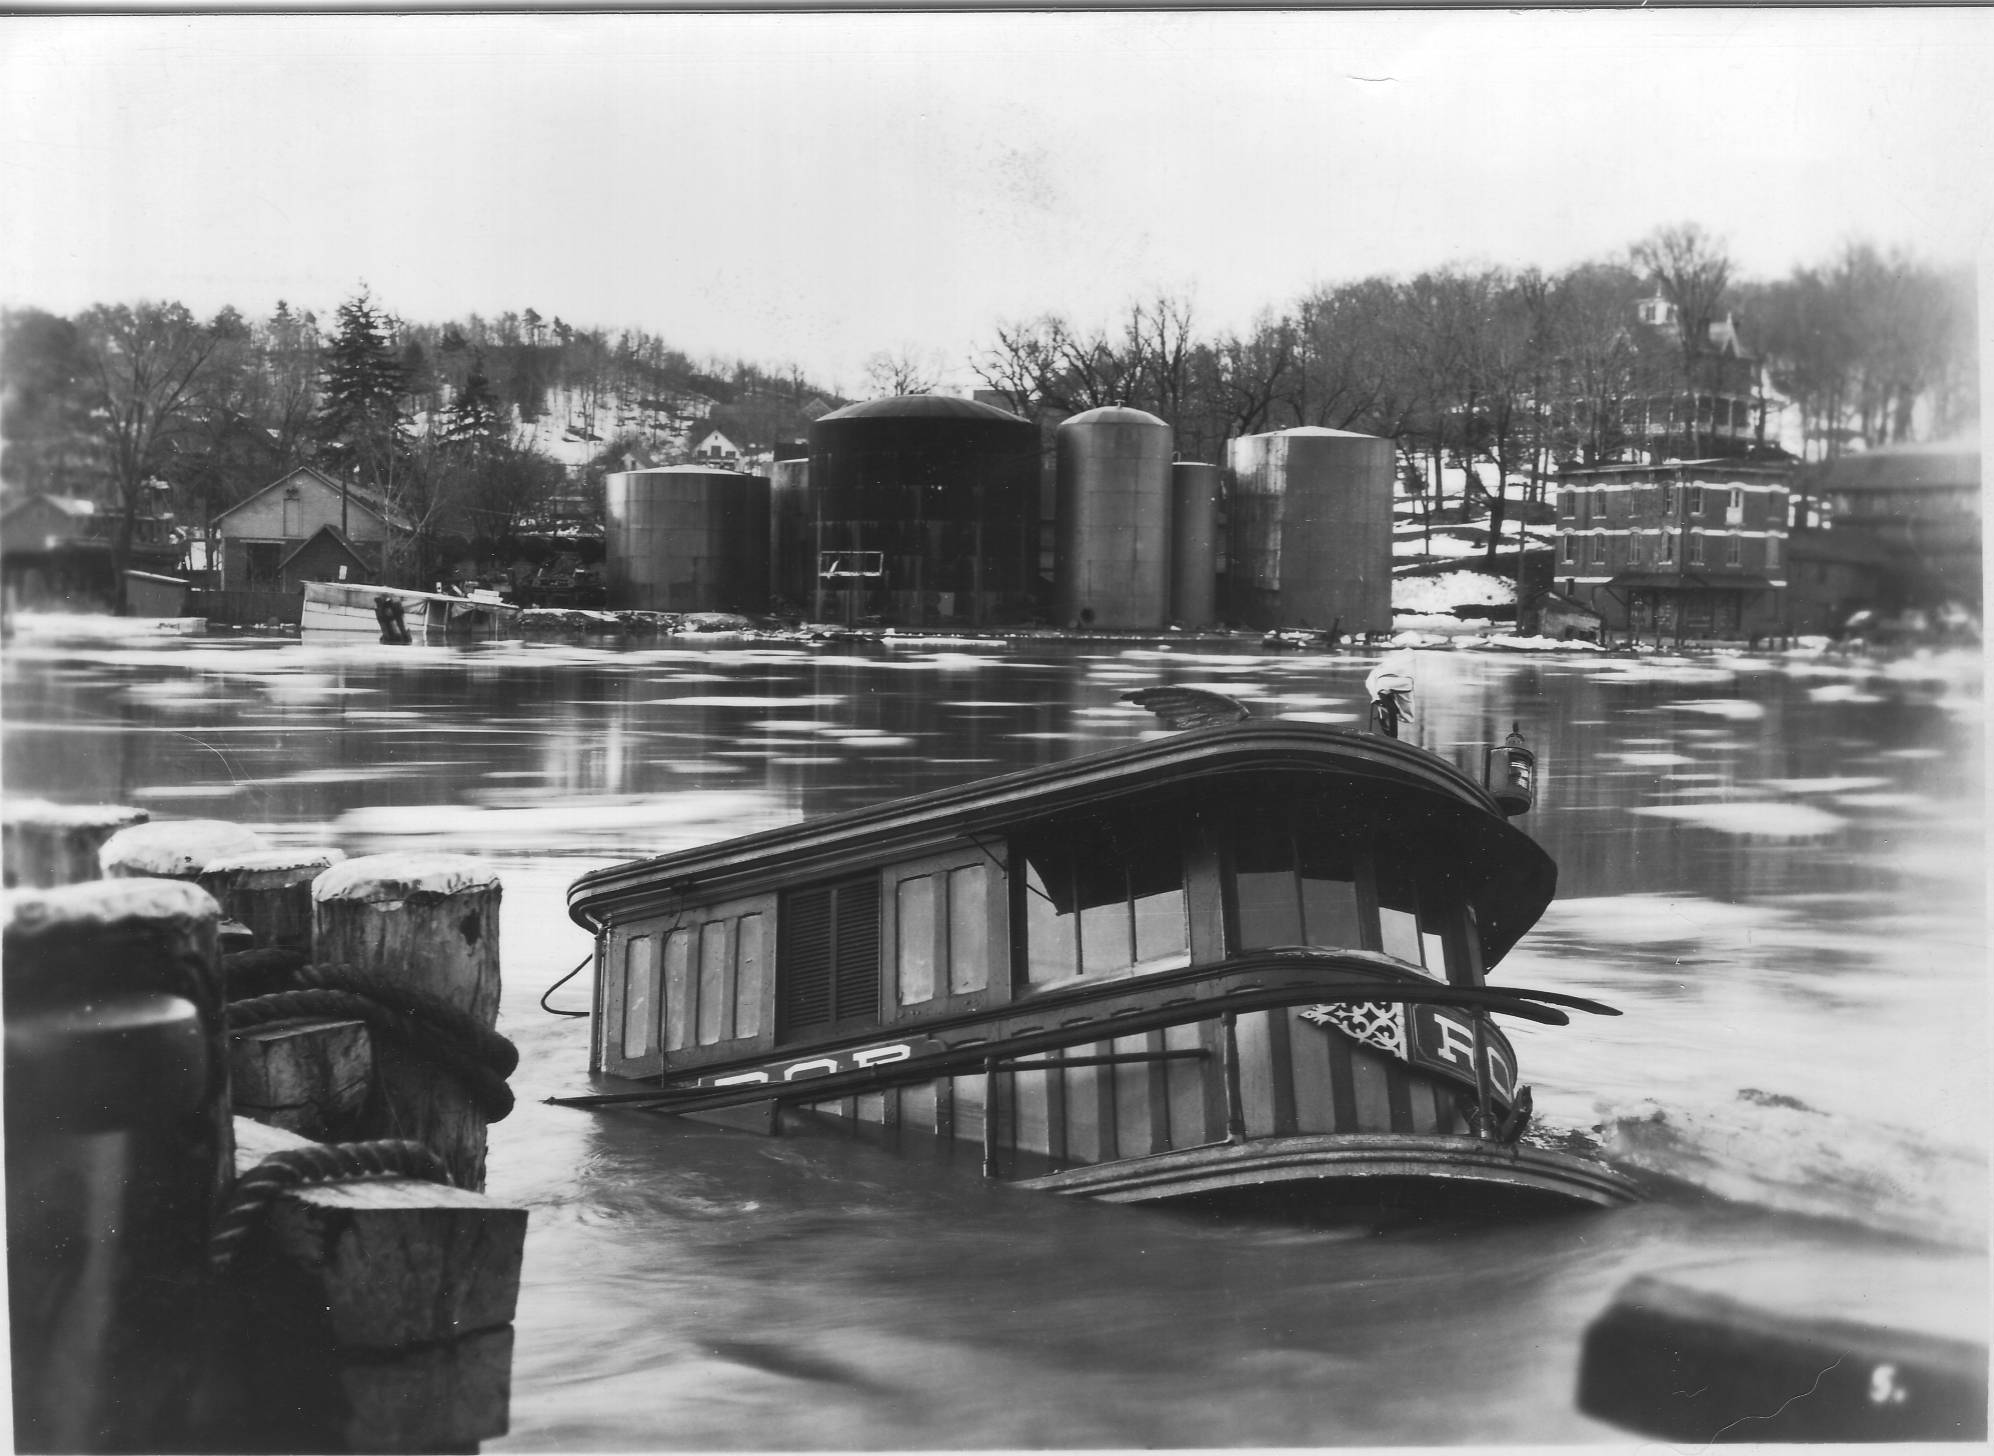 The popular Cornell Tug “Rob” sunk in the Rondout after the freshet (spring thaw flood) of March 1936. This photo shows the swamped boat and Sleightsburg on the other side. The “Rob” was raised and put back into service. Flooding along the Rondout has increased infrequency due to the effects of climate change. The historic neighborhood suffered severe flooding during Tropical Storm Irene and Superstorm Sandy. Water levels along the Hudson River have risen ten inches over the past hundred years, and now many